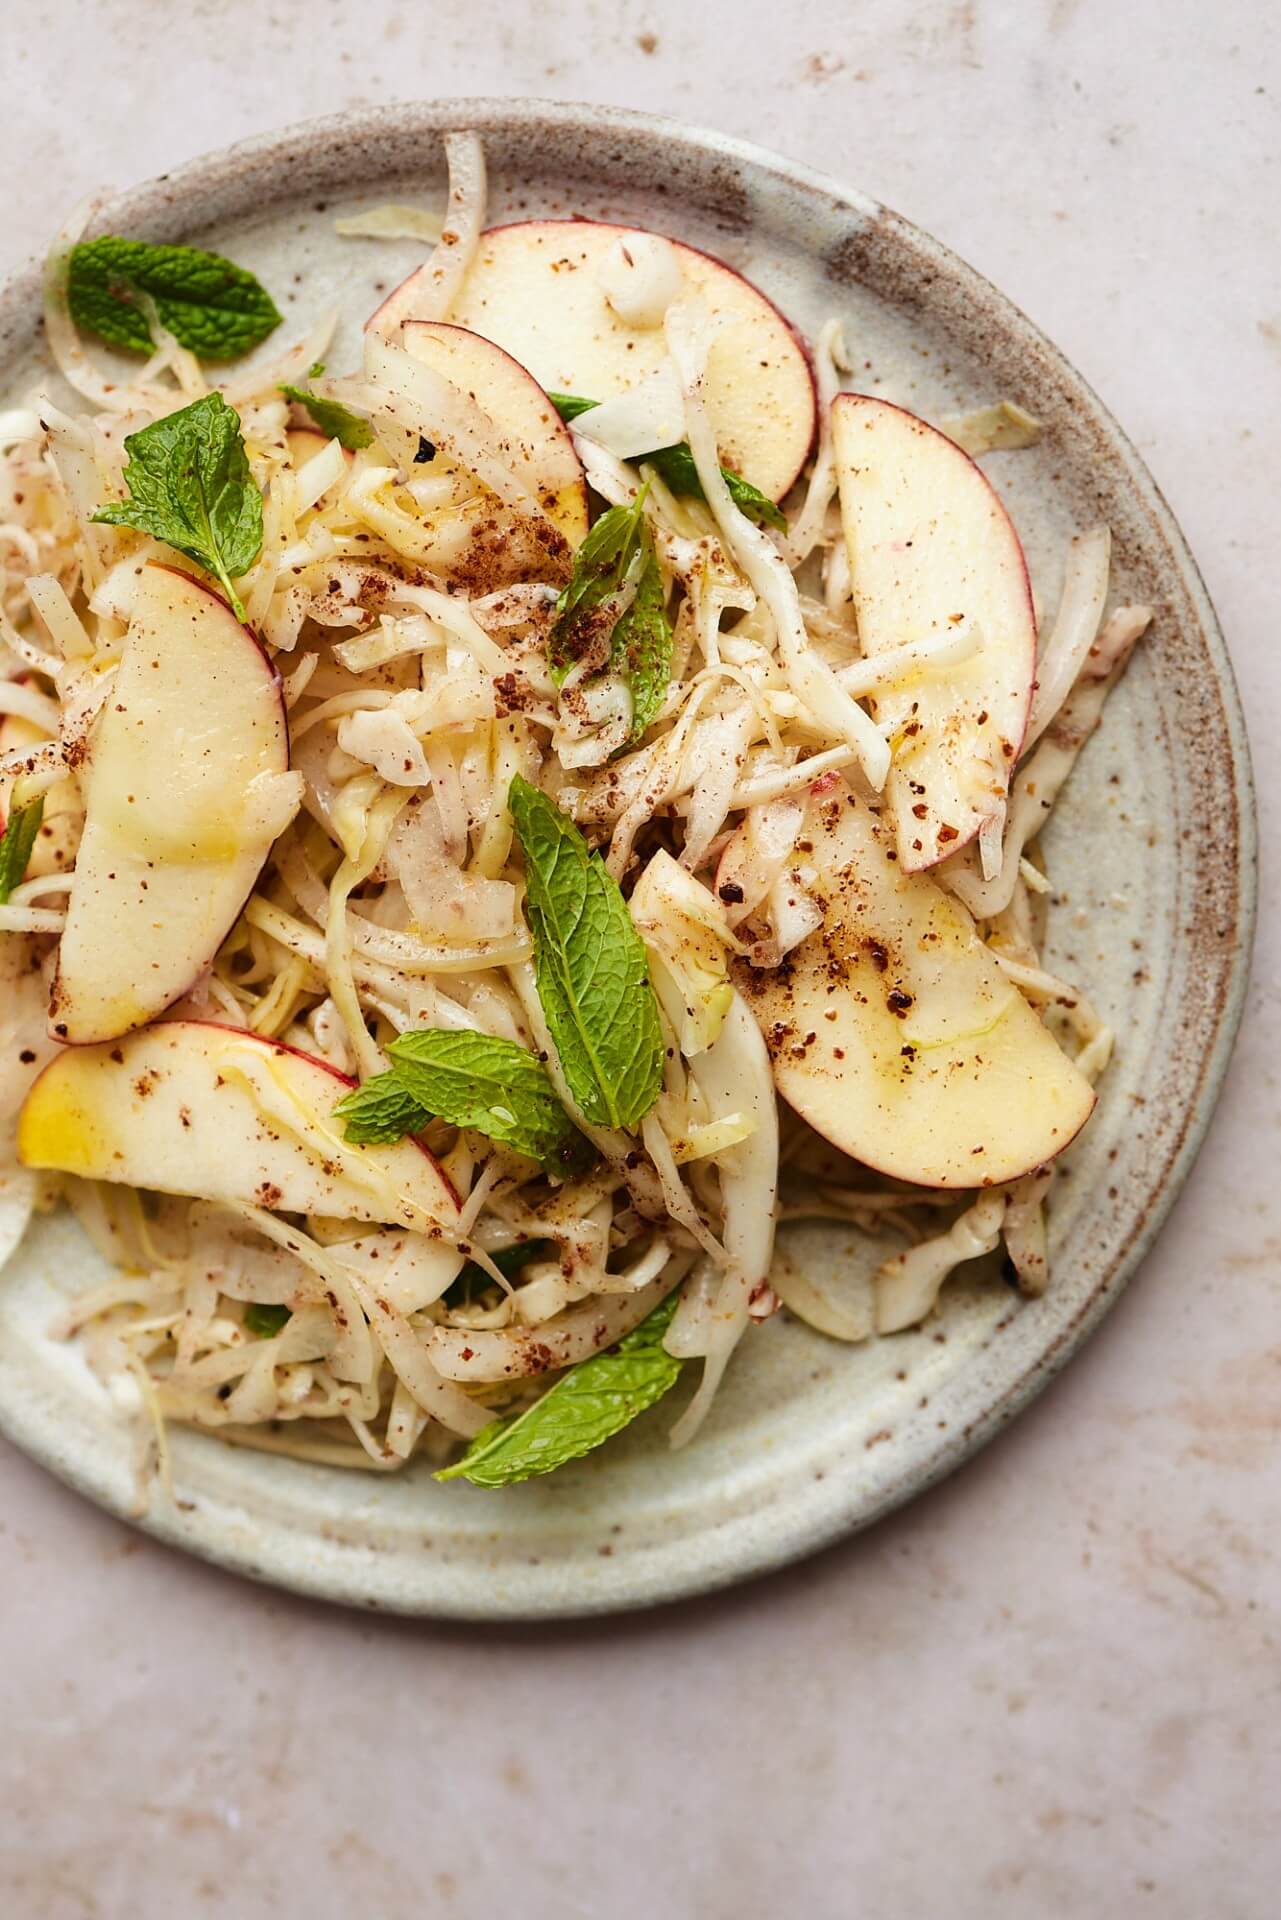 Safia Shakarchi of Another Pantry's apple, cabbage and sumac salad recipe